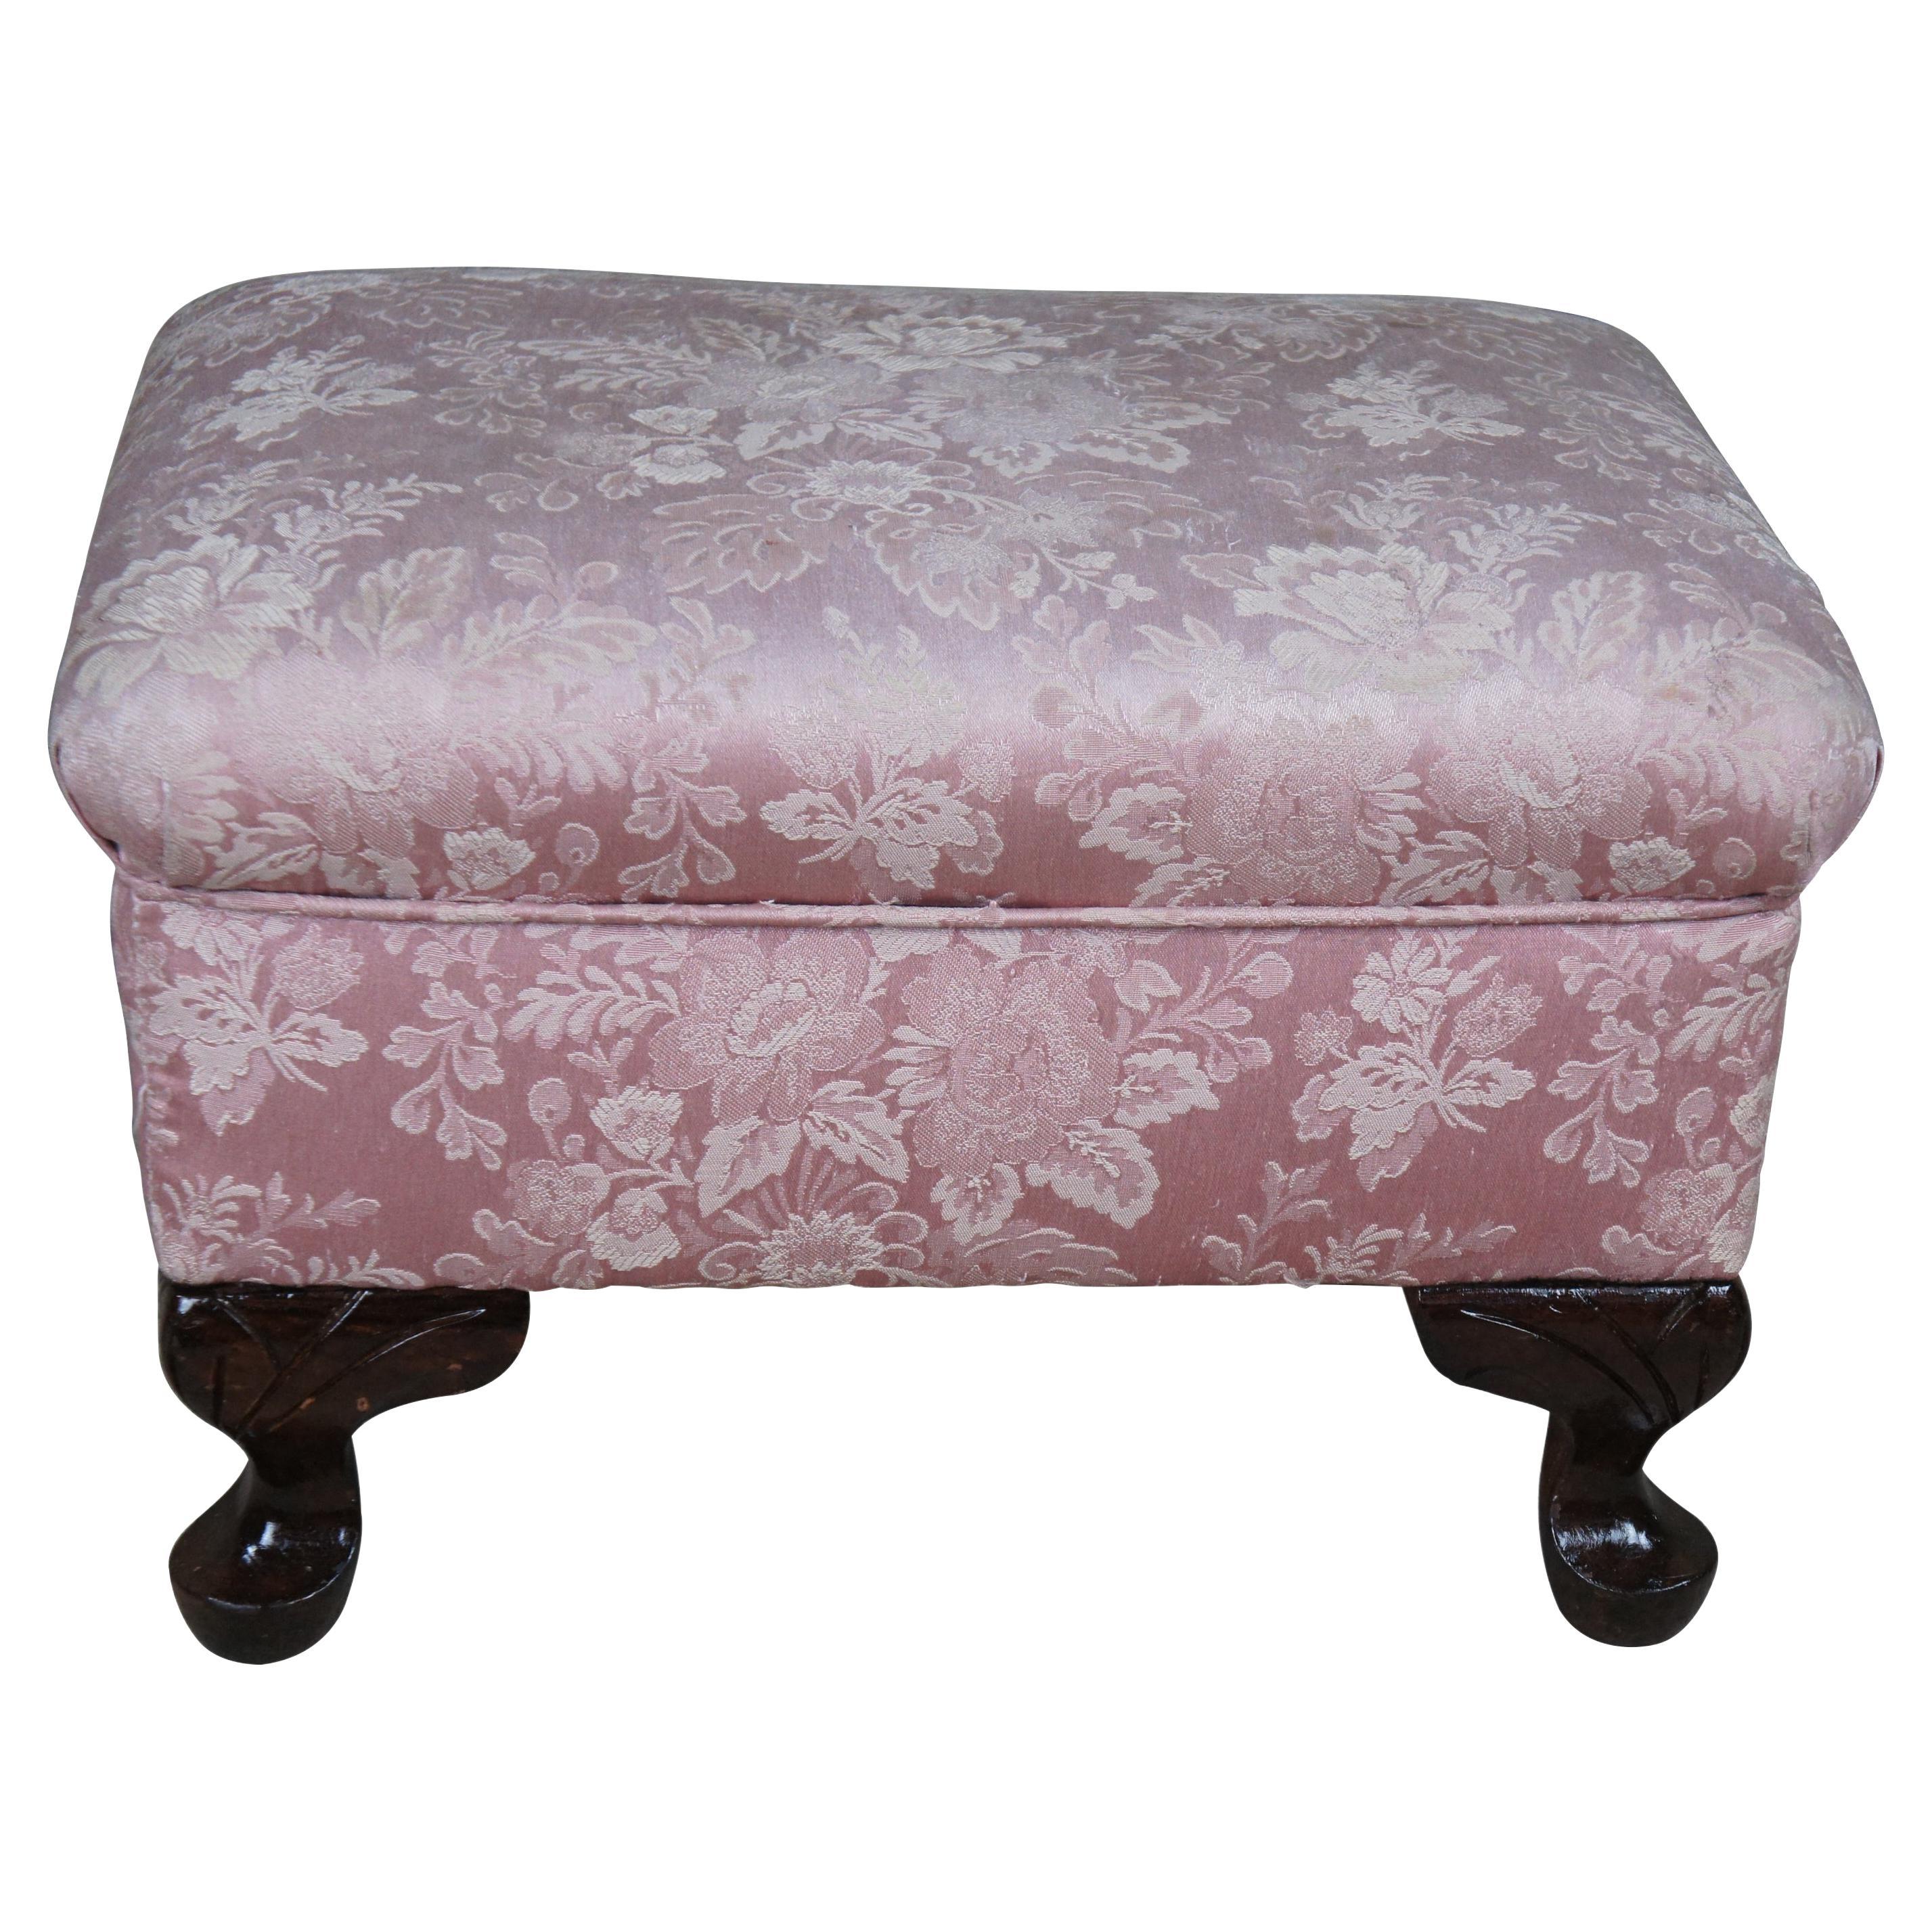 Vintage Queen Anne Floral Upholstered Walnut Ottoman Foot Stool Vanity Pouf Pink